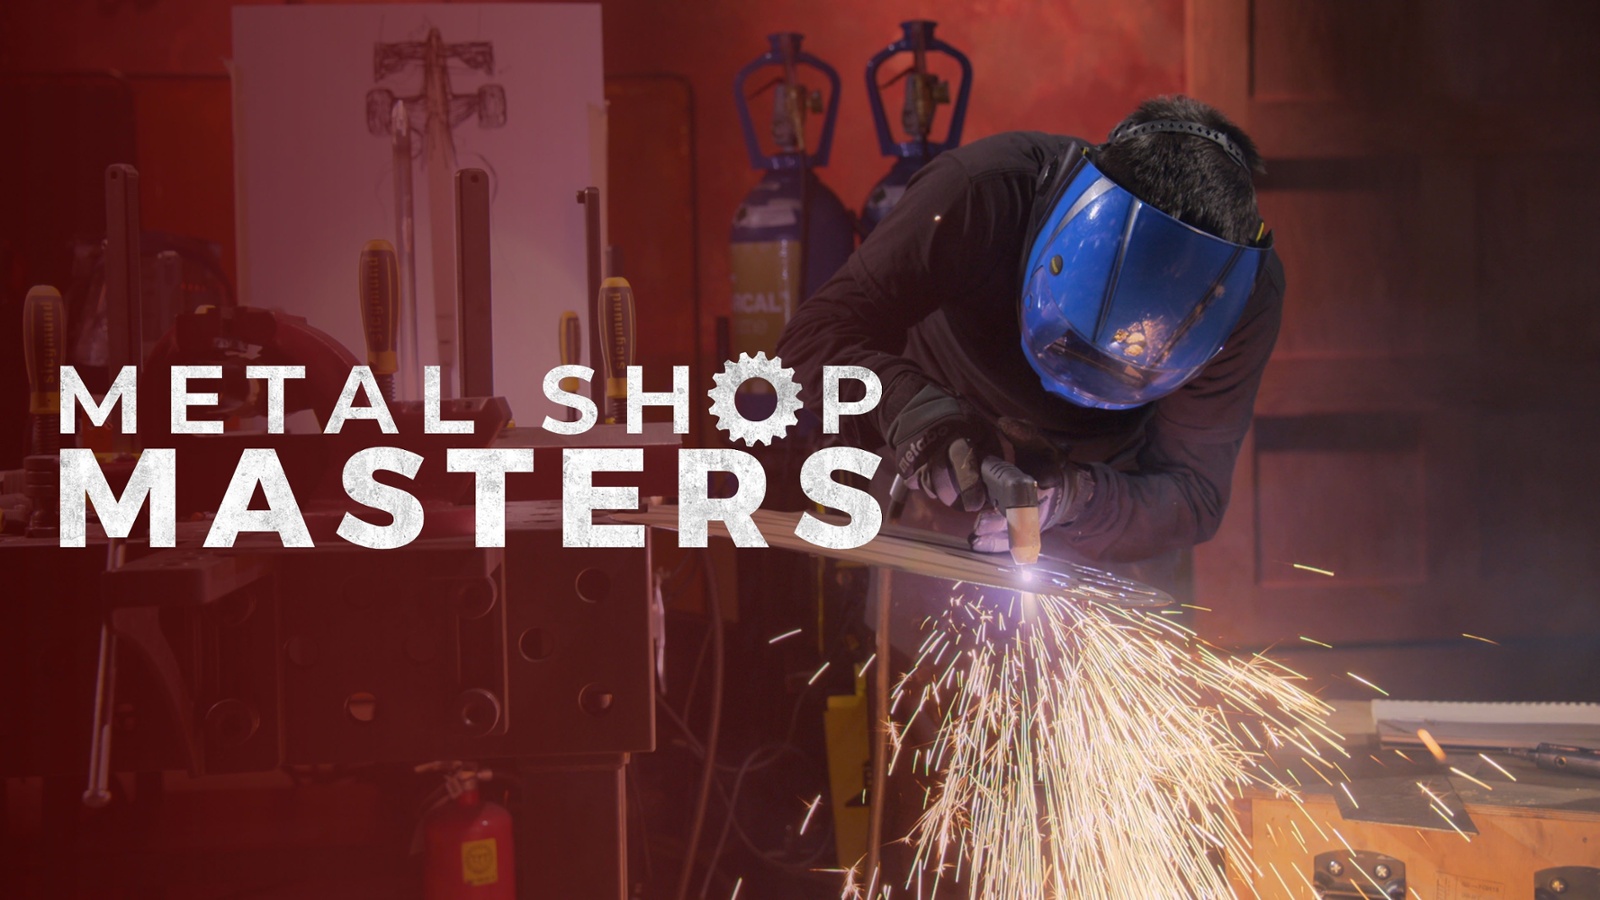 ESAB IS SOLE PROVIDER OF WELDING EQUIPMENT FOR NETFLIX SERIES METAL SHOP MASTERS